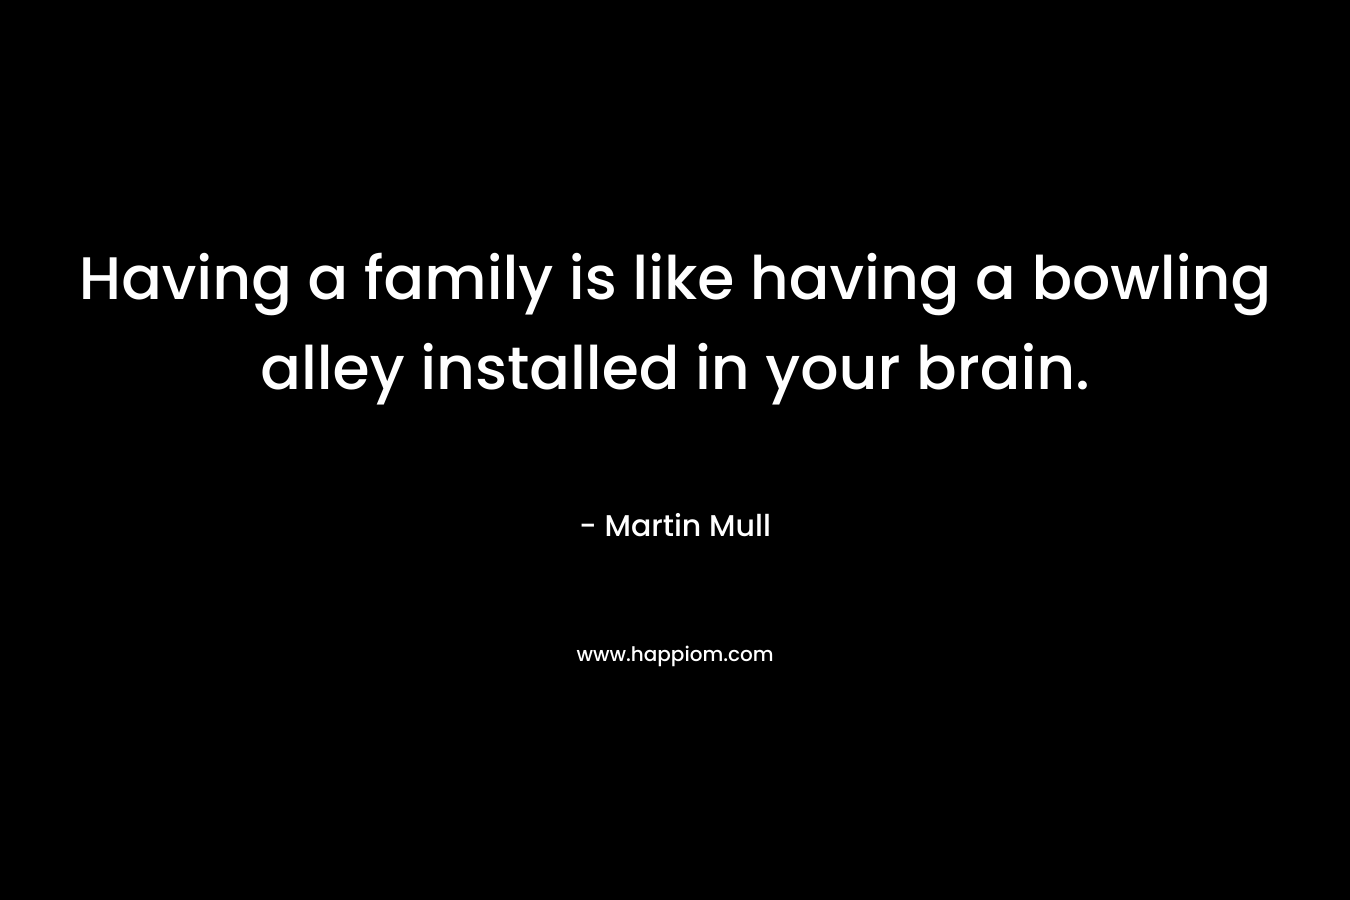 Having a family is like having a bowling alley installed in your brain. – Martin Mull